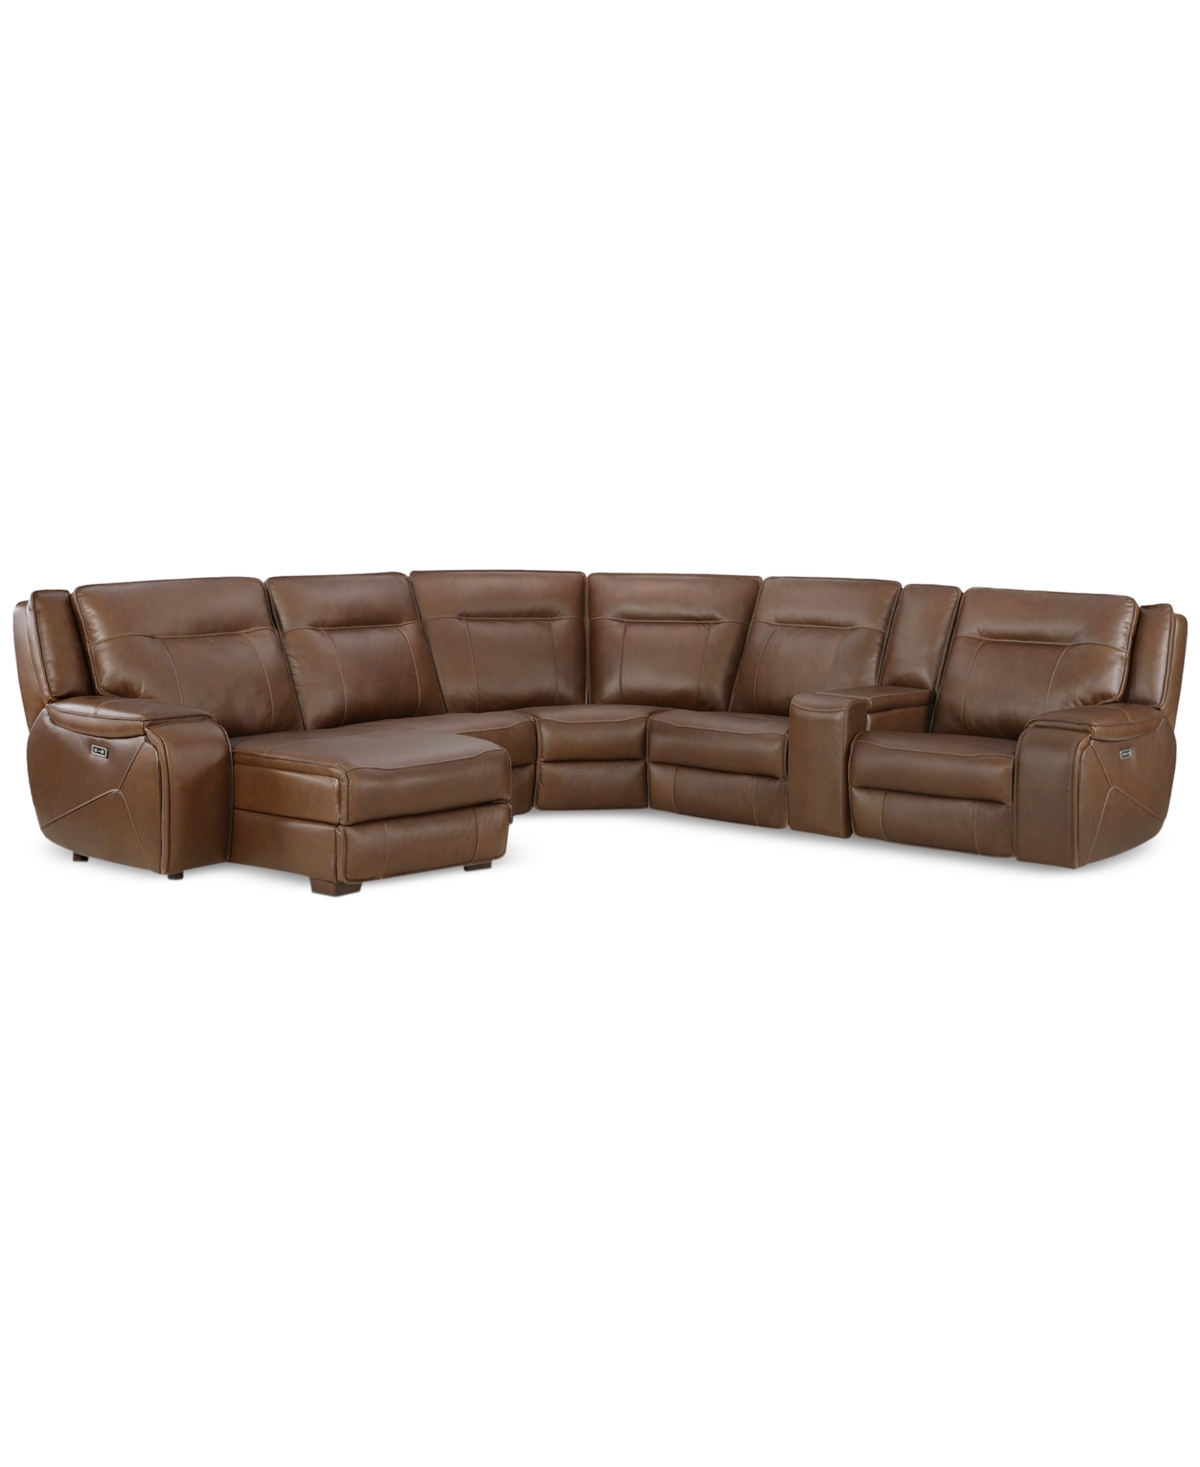 Macy's Hansley 6-pc. Zero Gravity Leather Sectional With 2 Power Recliners And Chaise, Created For  In Brown